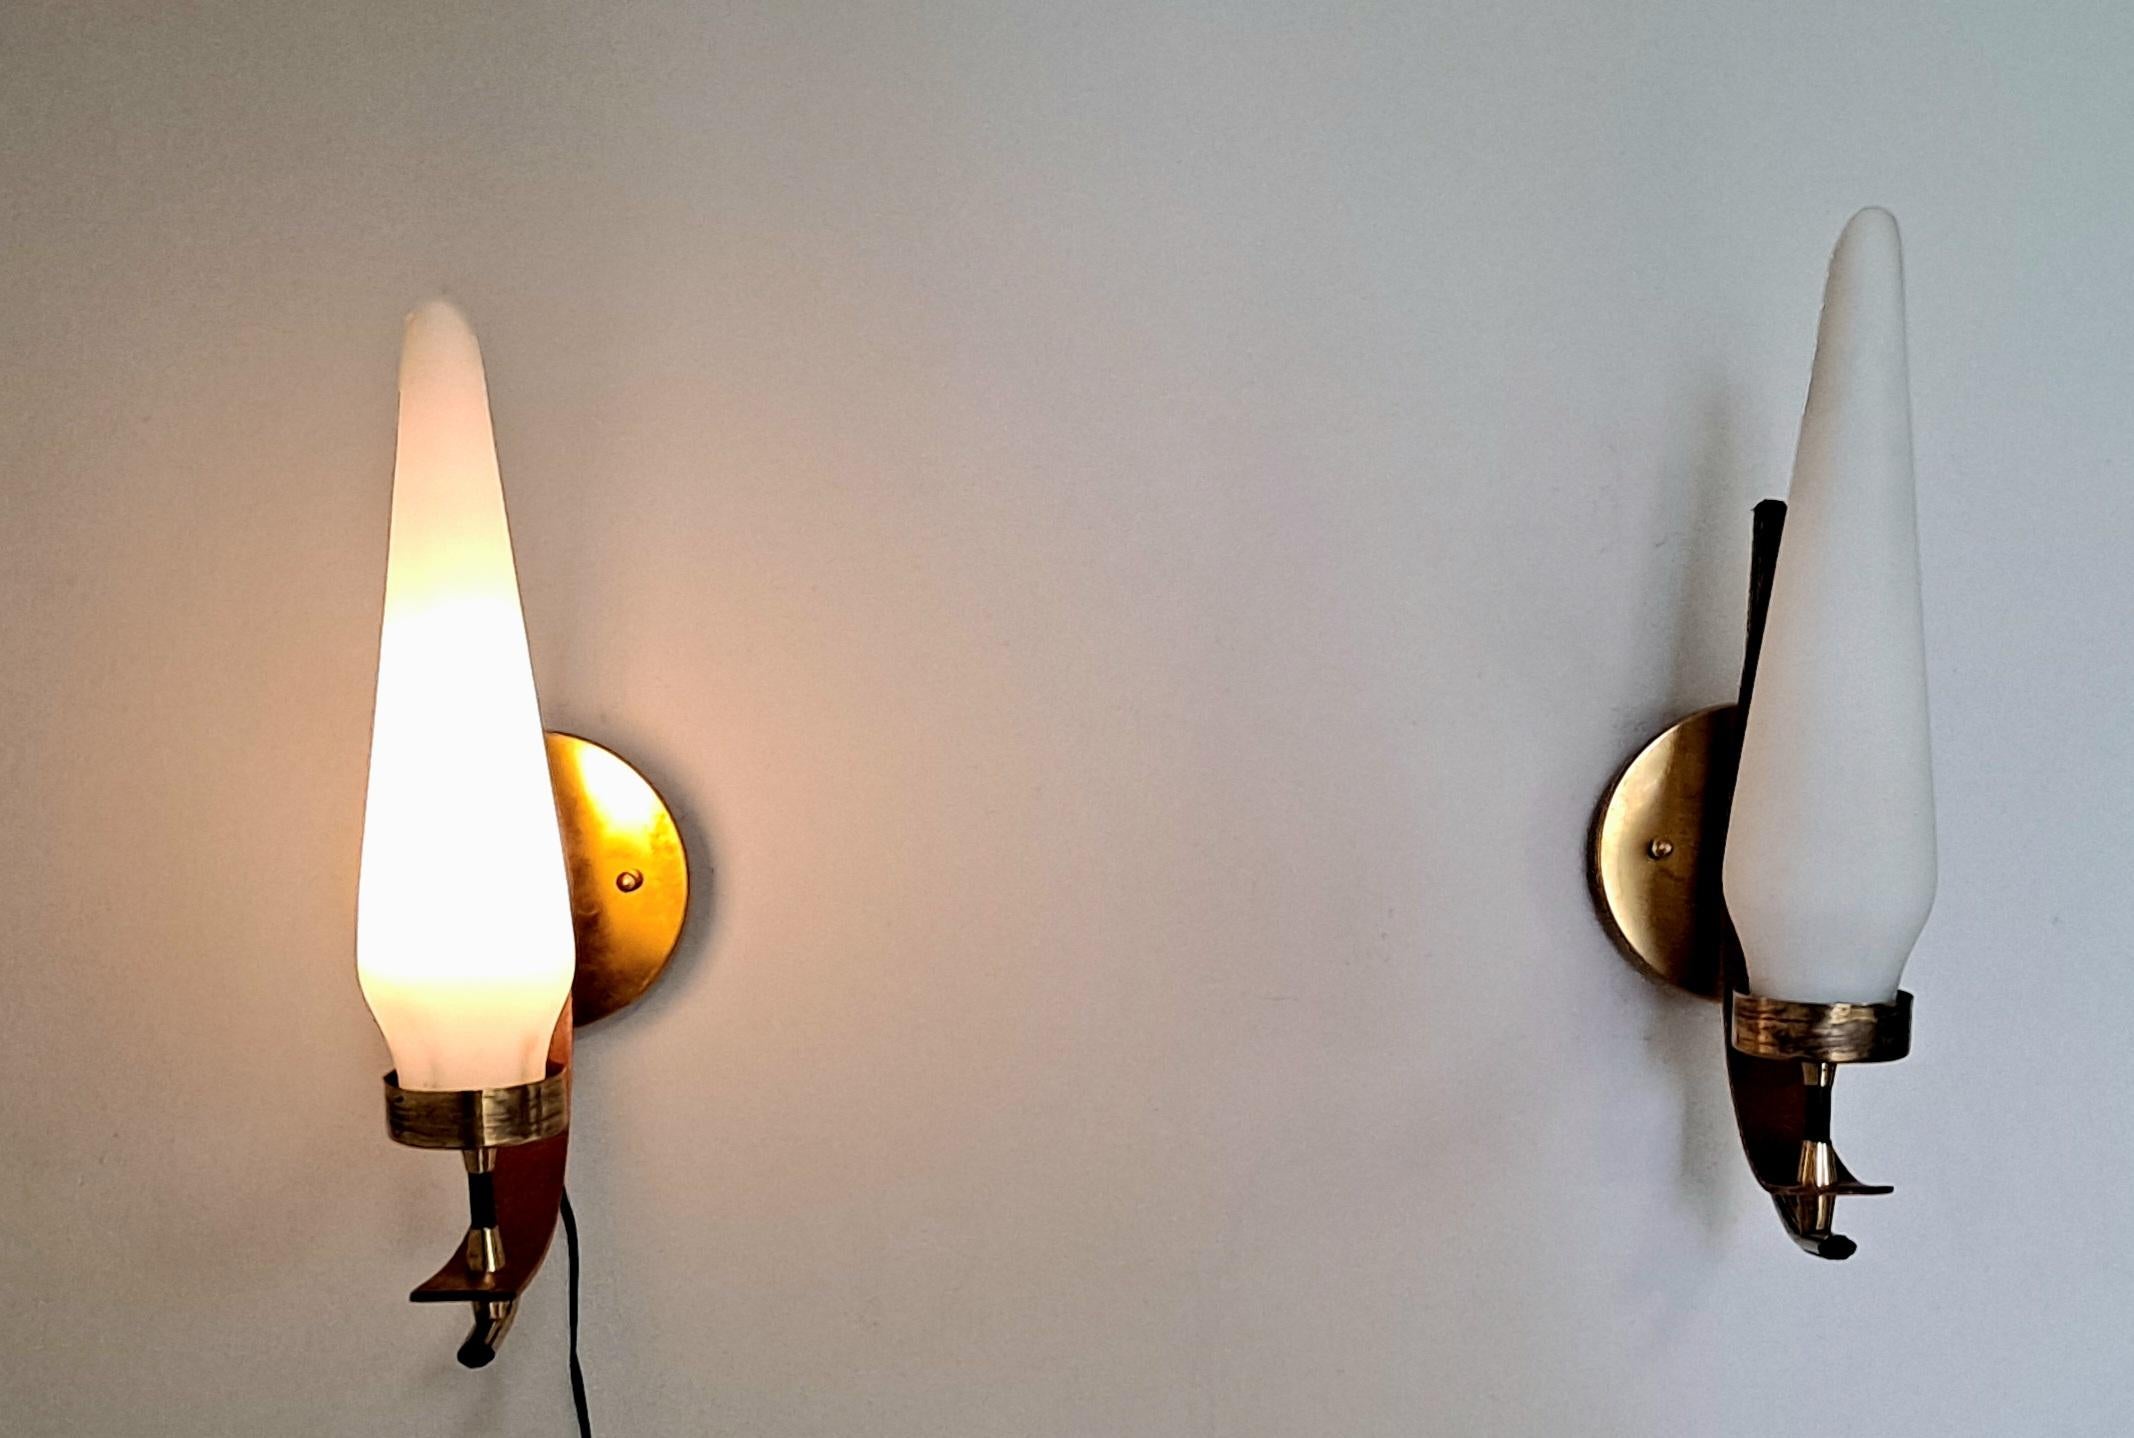 Italian pair of vintage wall sconces Murano glass 
brass and wood base .
